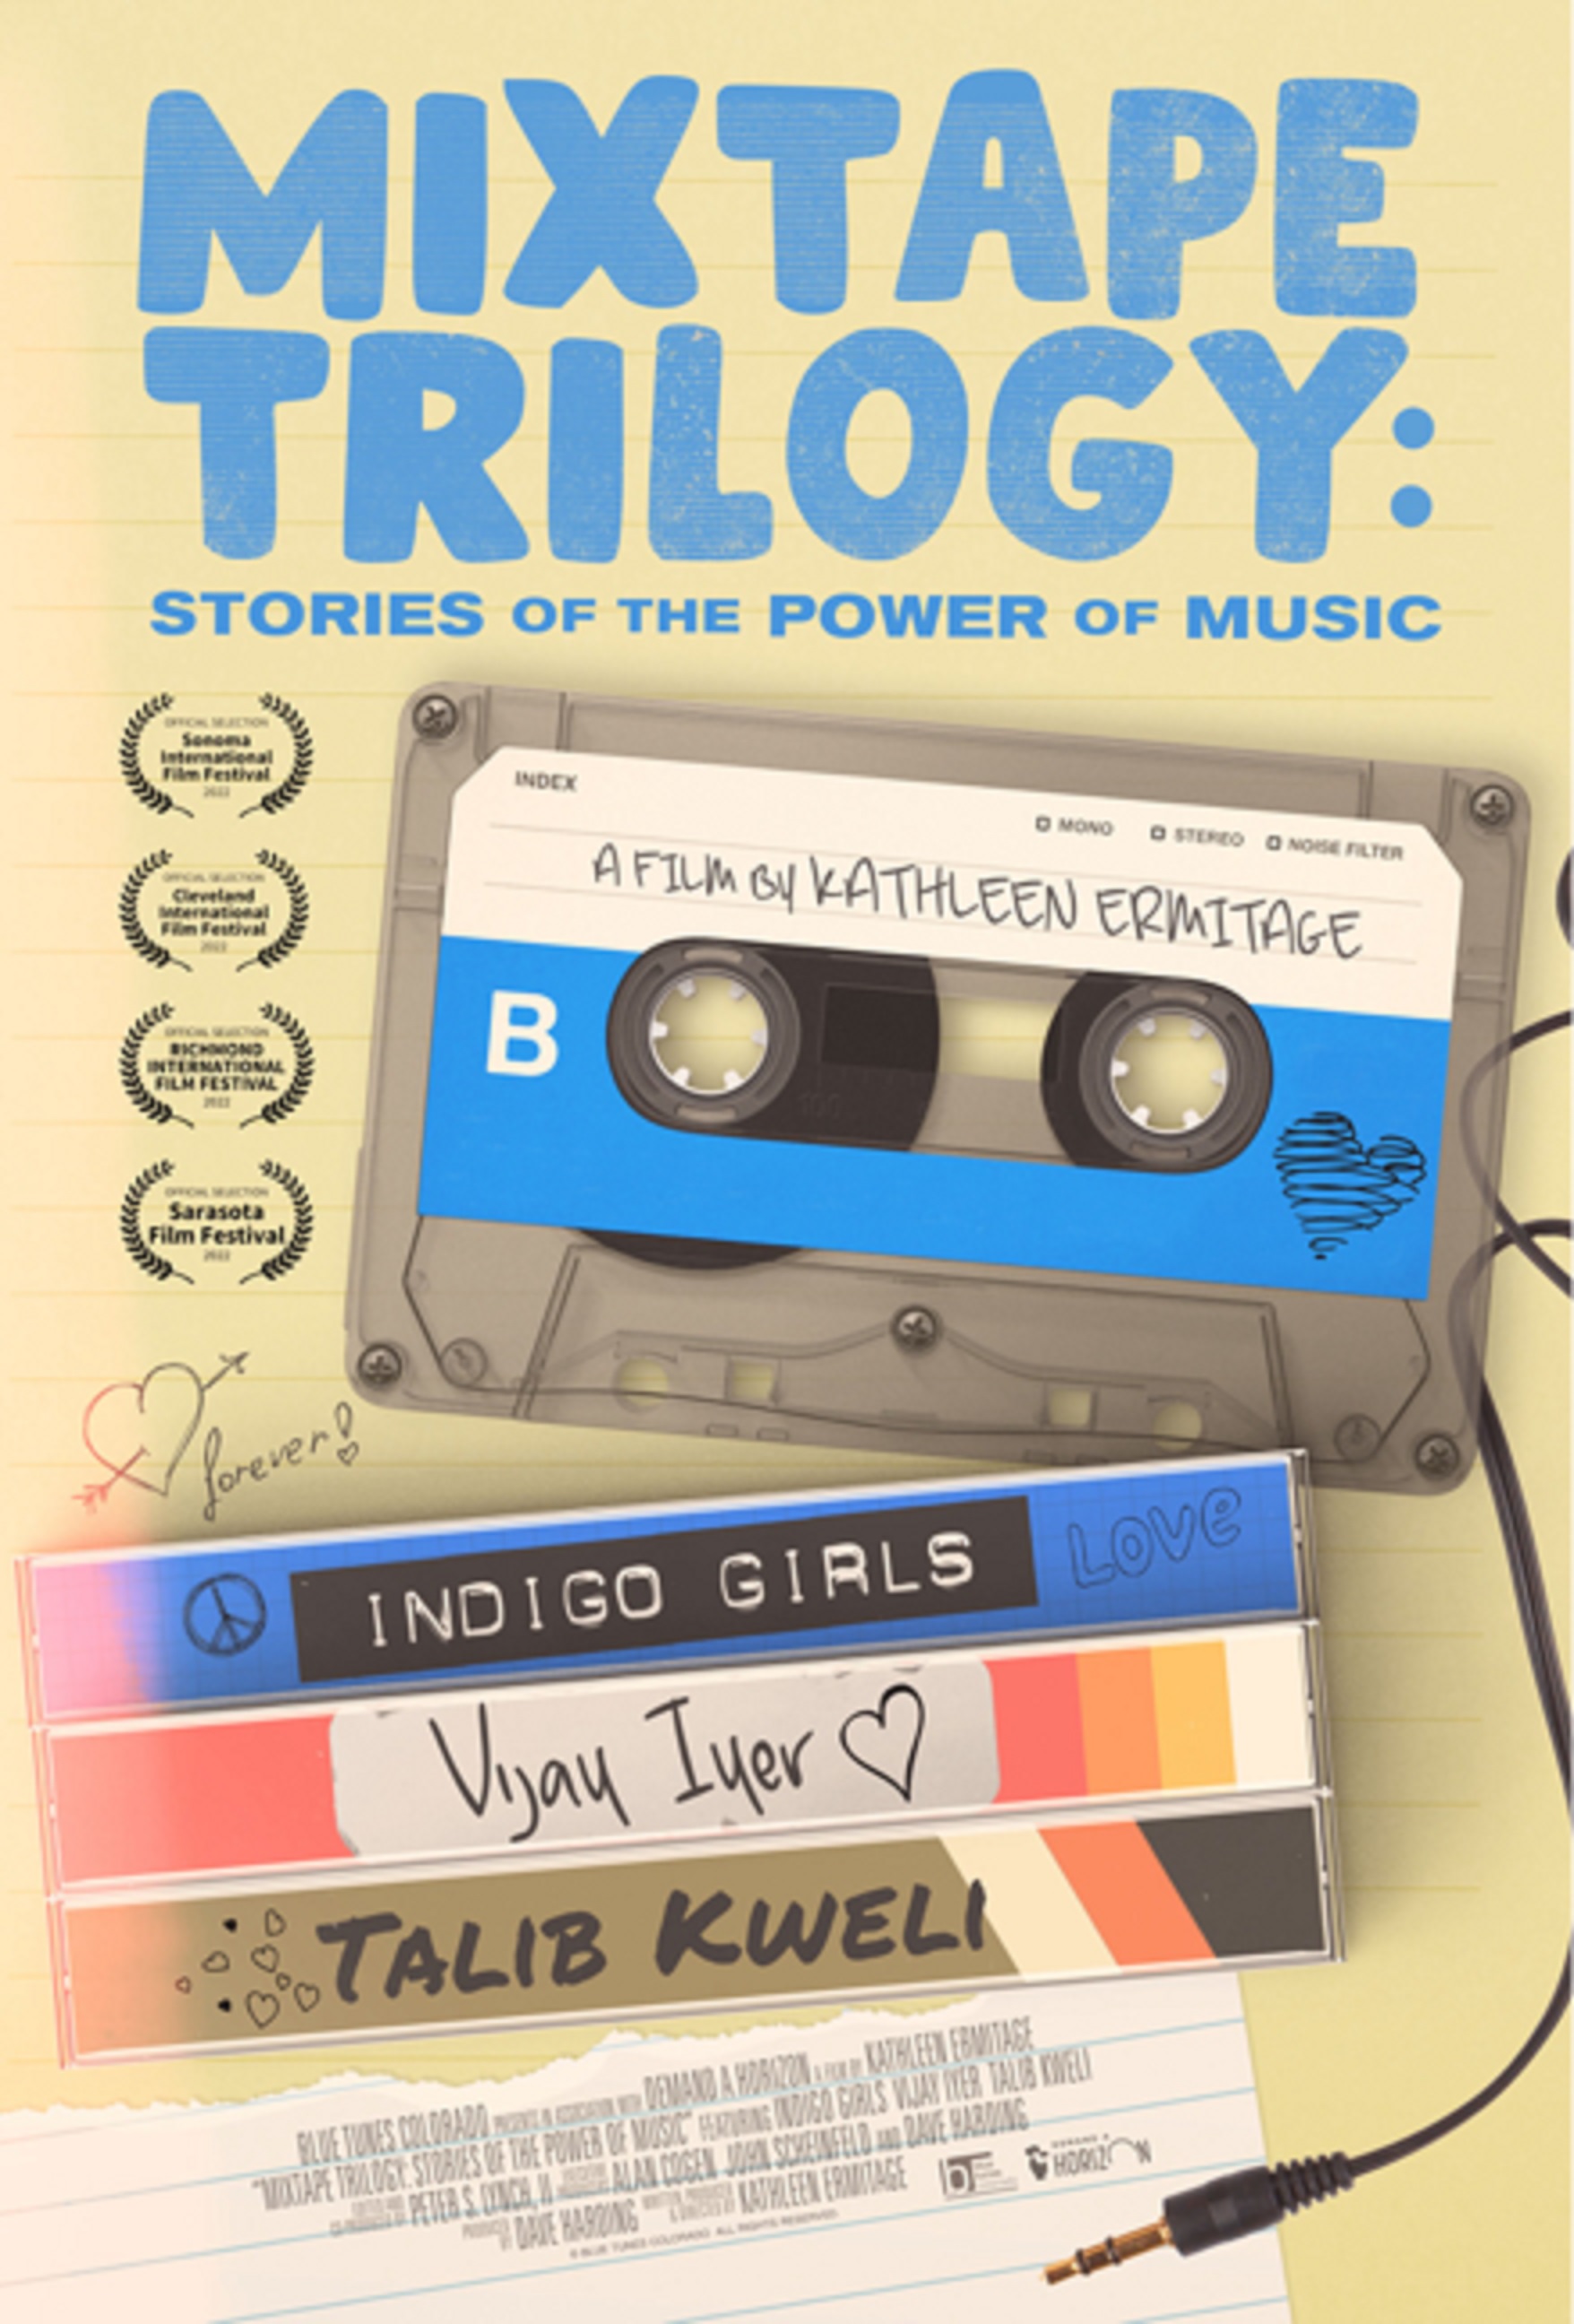 MIXTAPE TRILOGY:  STORIES OF THE POWER OF MUSIC